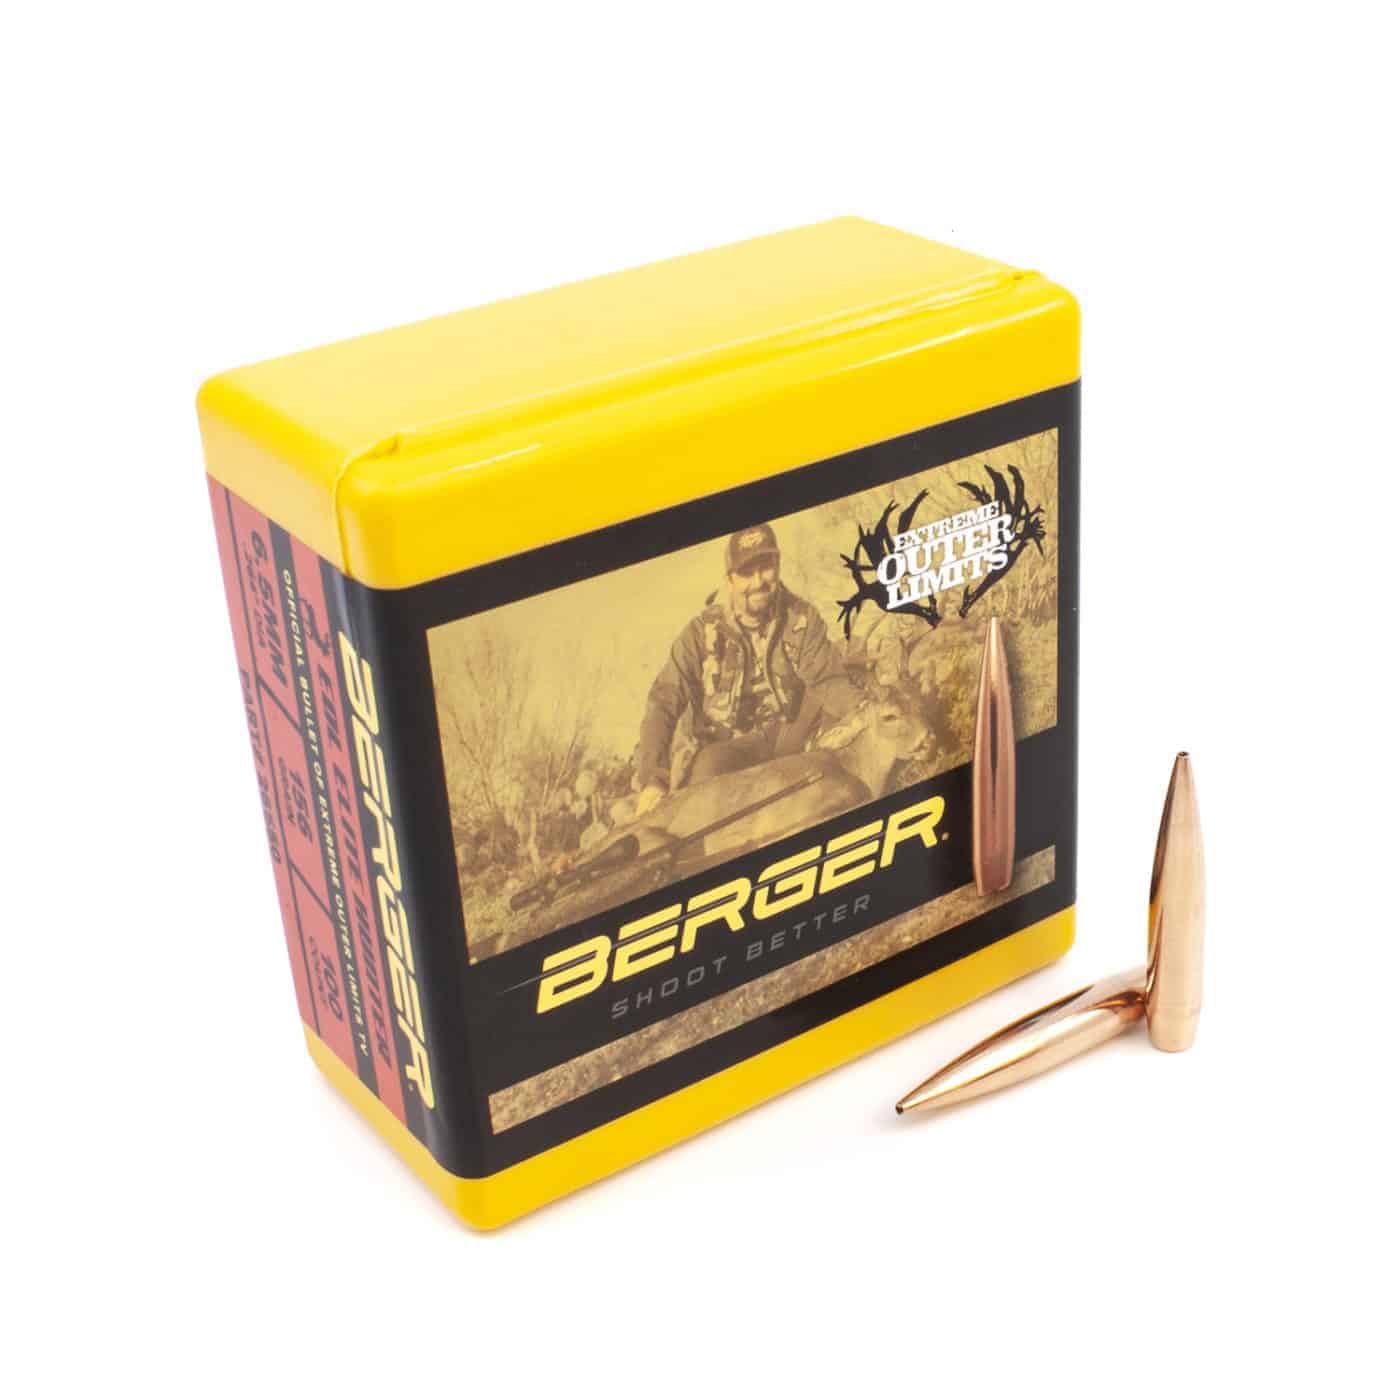 Featured image for “Berger 264 Cal 6.5mm 156gr Extreme Outer Limits (EOL) Elite Hunter Rifle Bullets”